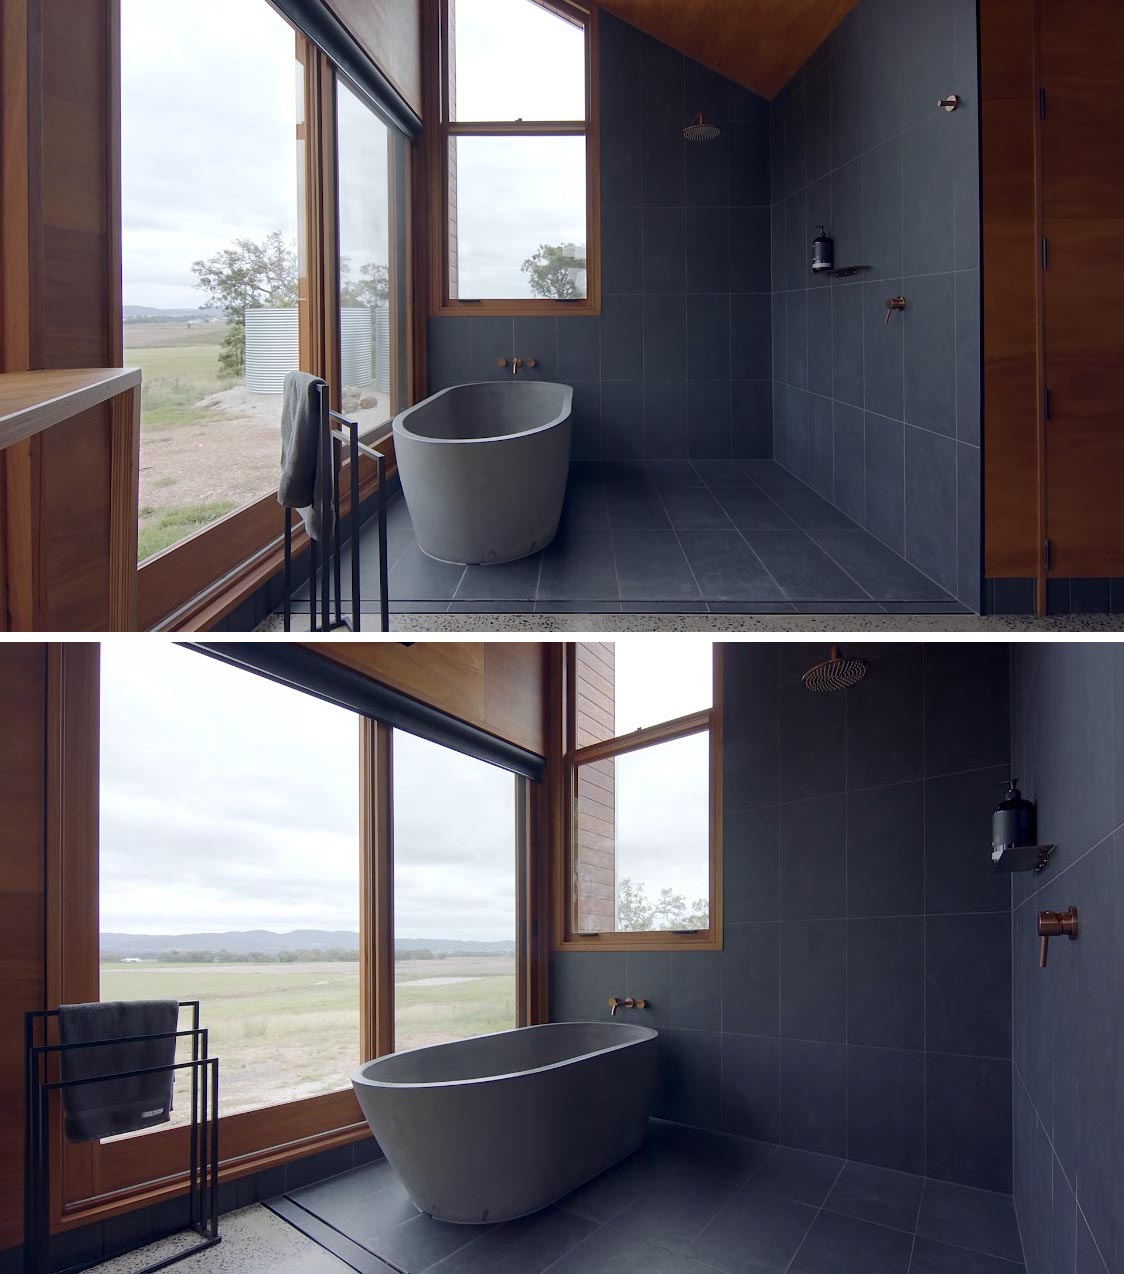 This modern off-grid tiny house includes an open plan bathroom with a freestanding bathtub and gray tiled shower.